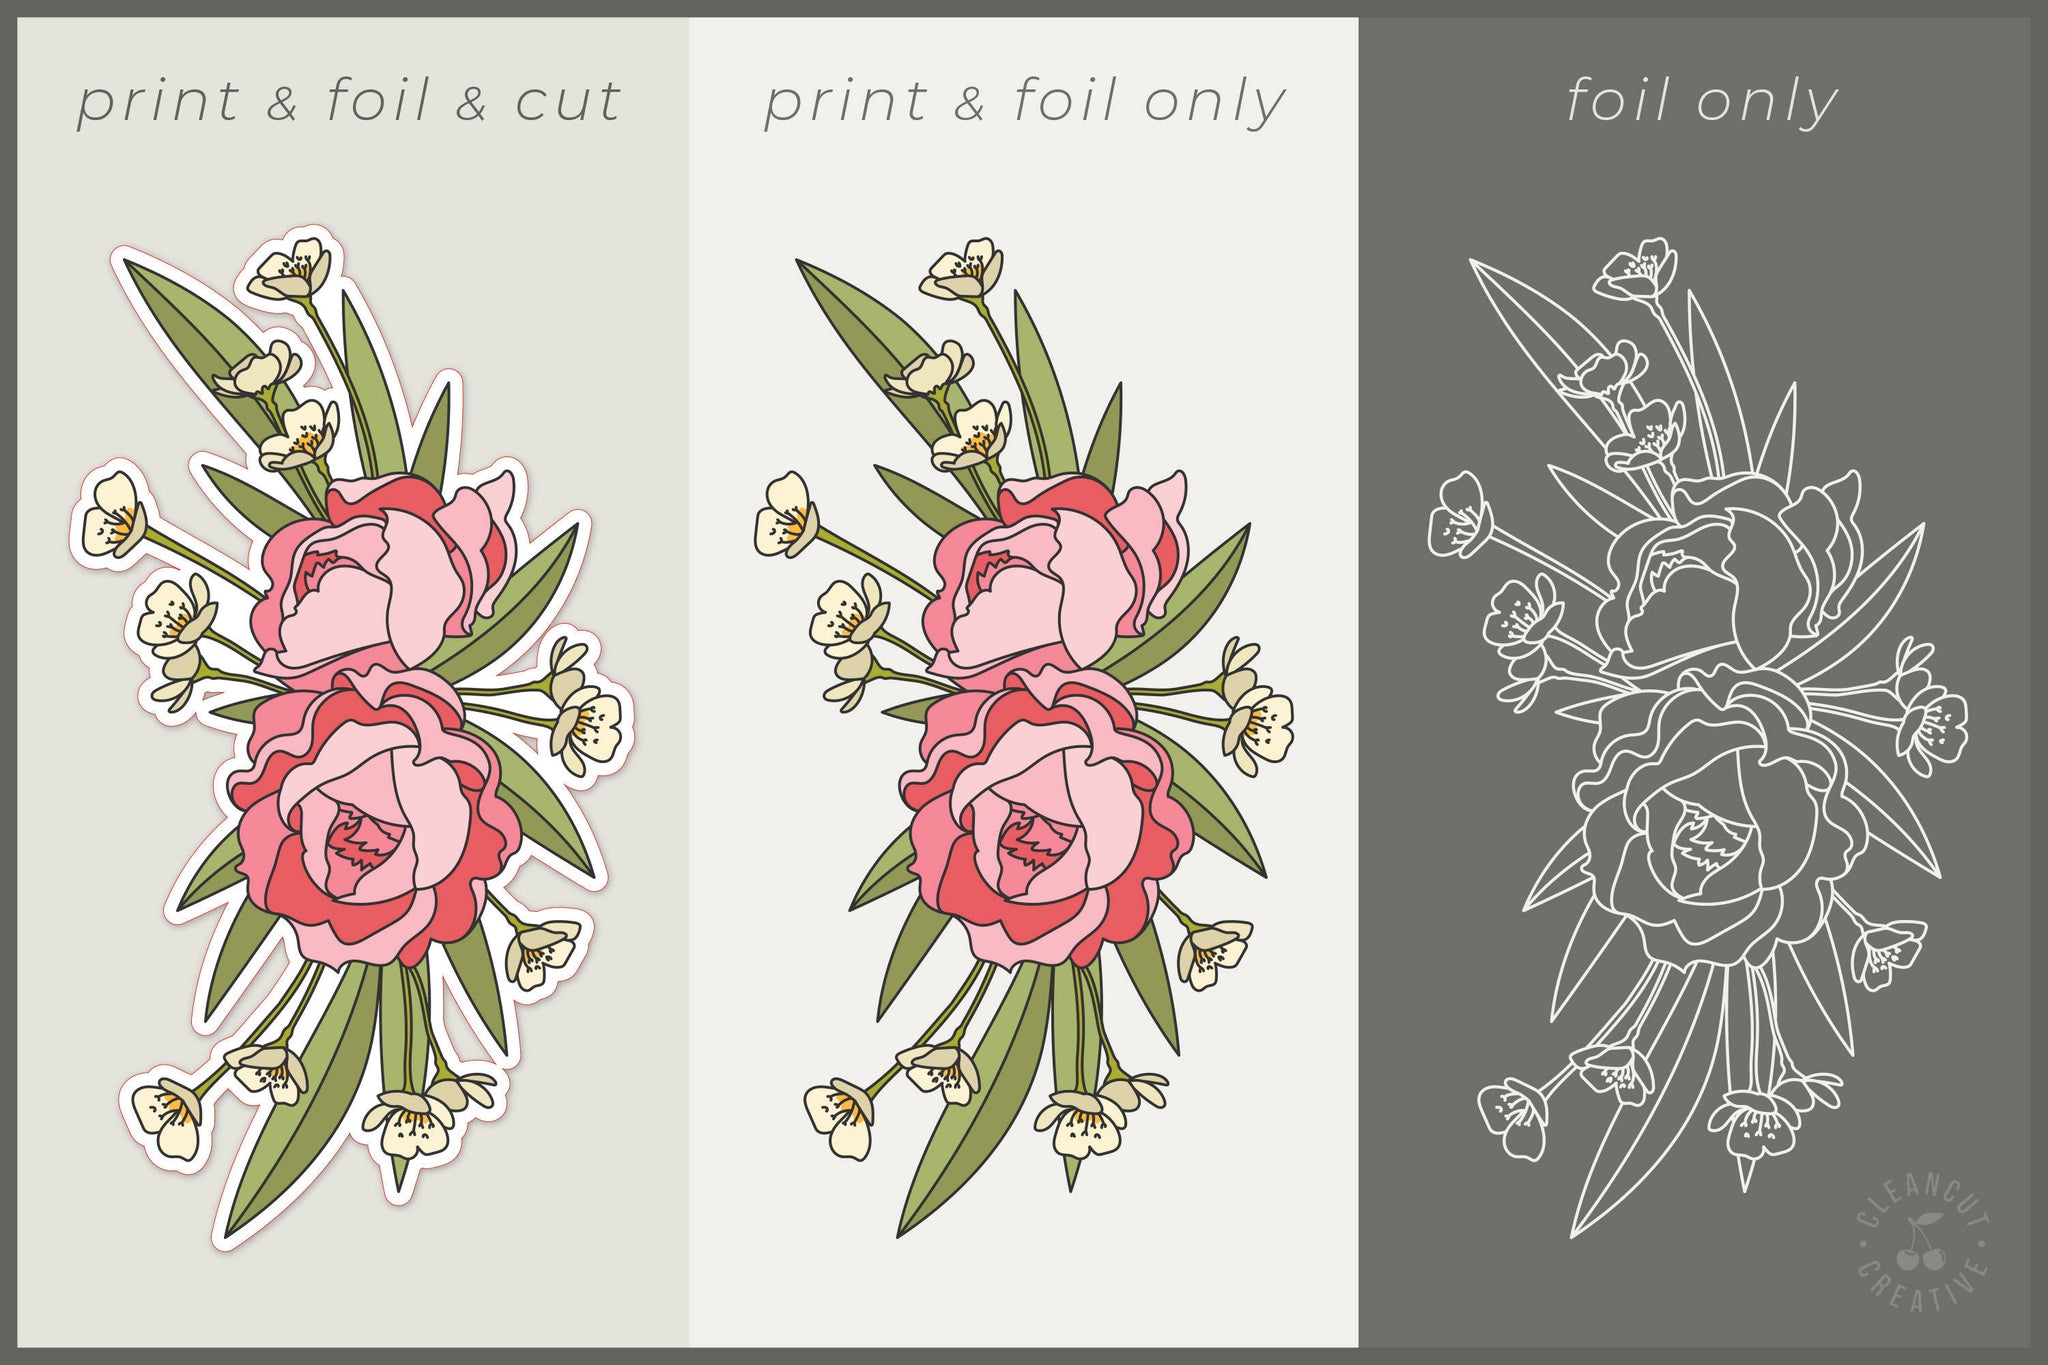 Download Clip Art Draw Line Flowers For Sketch Pen Attachment Peony Single Line Flower Svg Foil Quill And Engraving Single Line Vector Art Collectibles